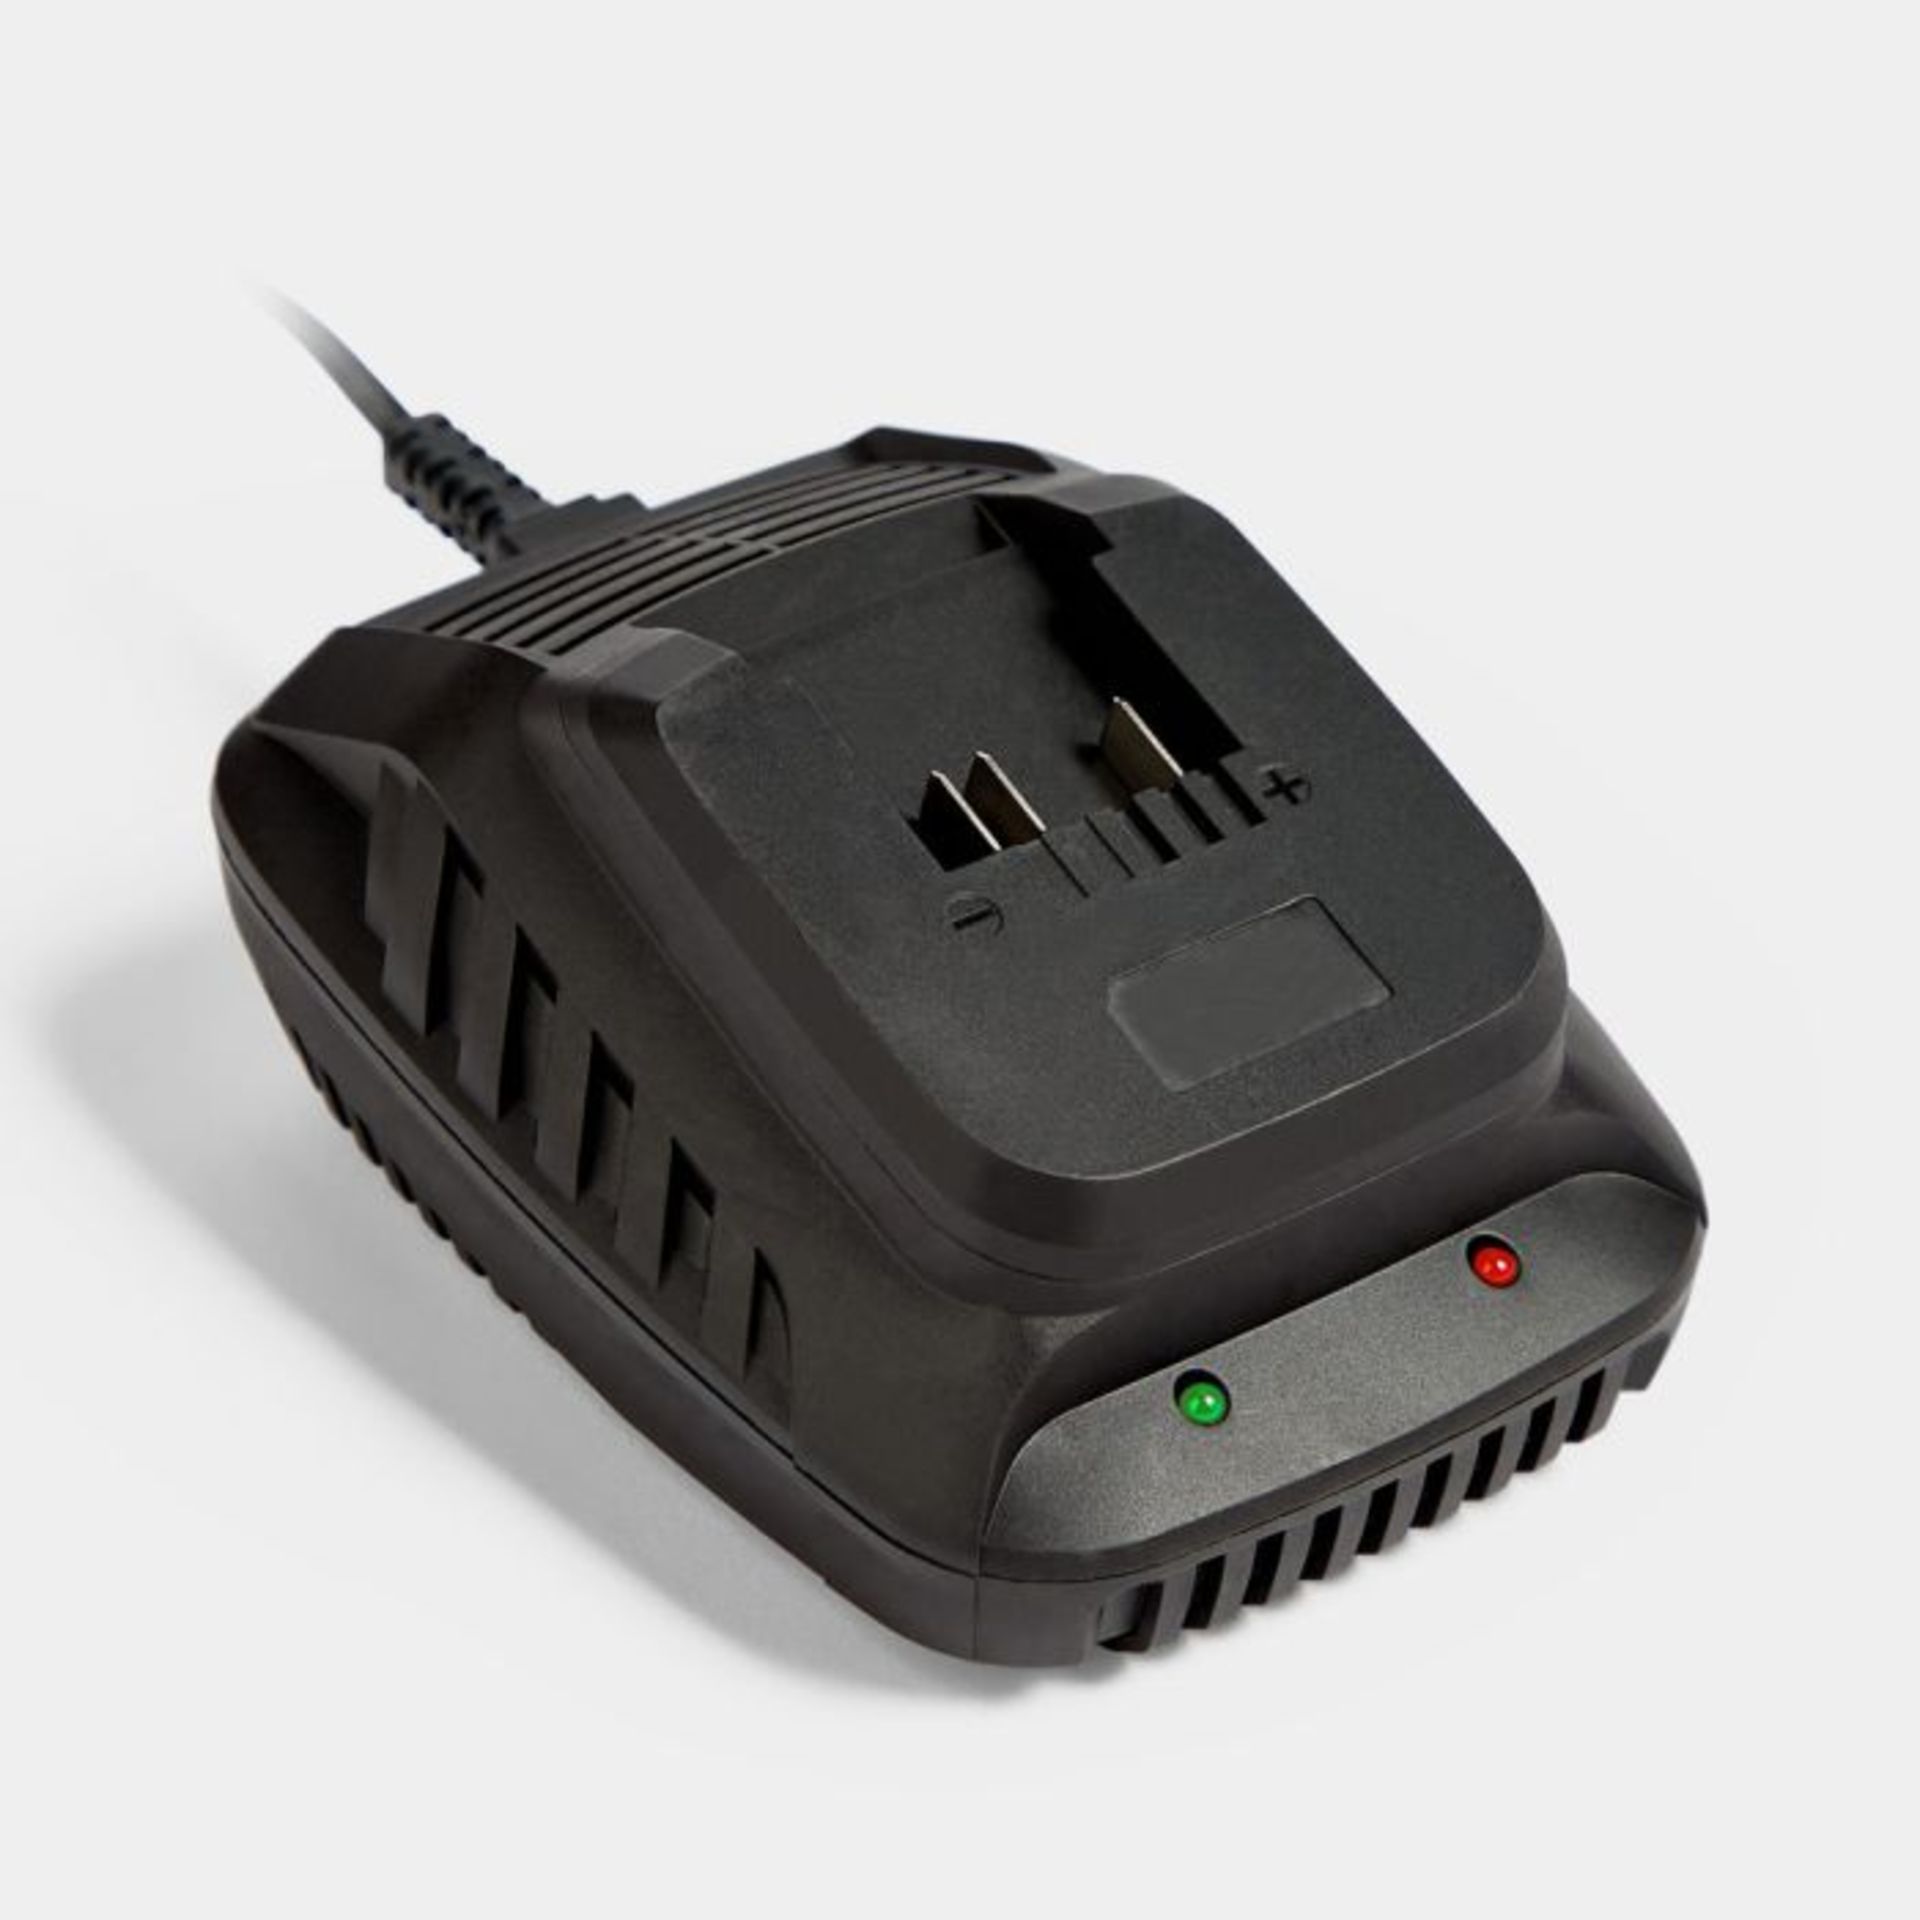 40V Range Spare Charger. - S2.13. Charge your 40v 2Ah Li-ion battery in no time with our 40V Range